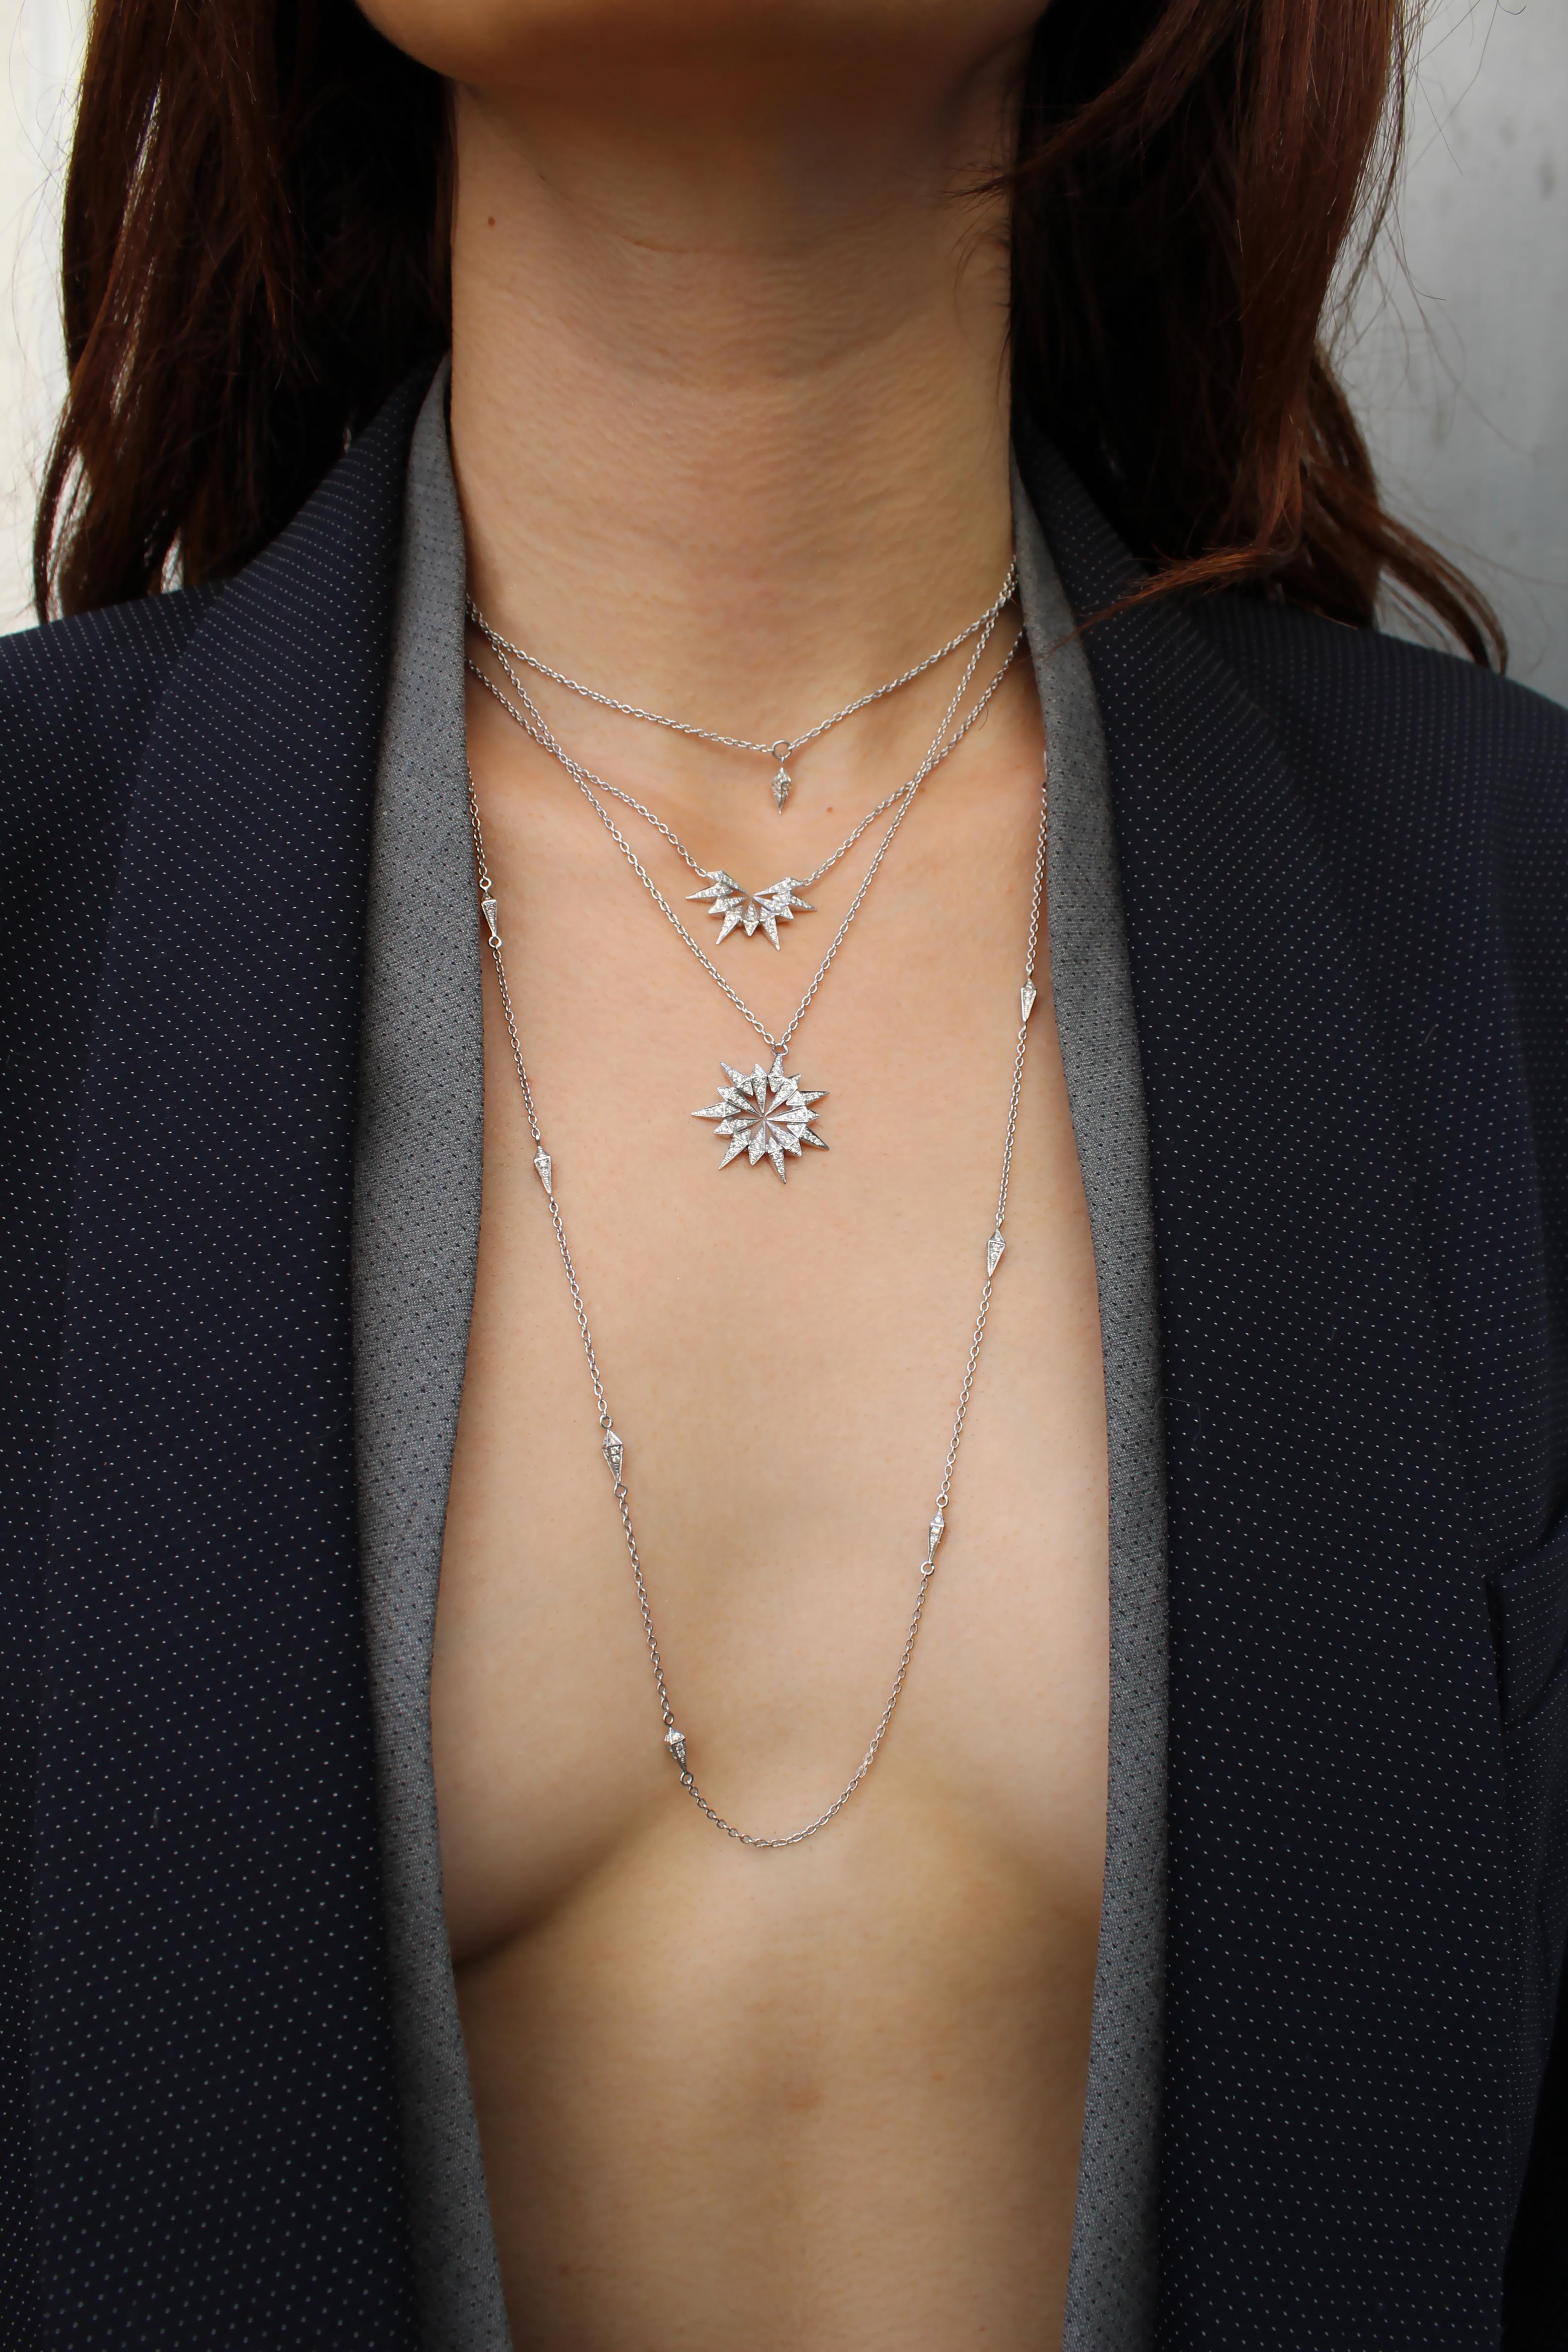 18k White Gold Diamond Starburst Pendant Necklace features a spike edge white diamond pave starburst pendant set in 18k White Gold on an 18k White Gold Chain
Includes lobster closure clasp at back of the neck

18k White Gold : 5.84g
White Diamonds :